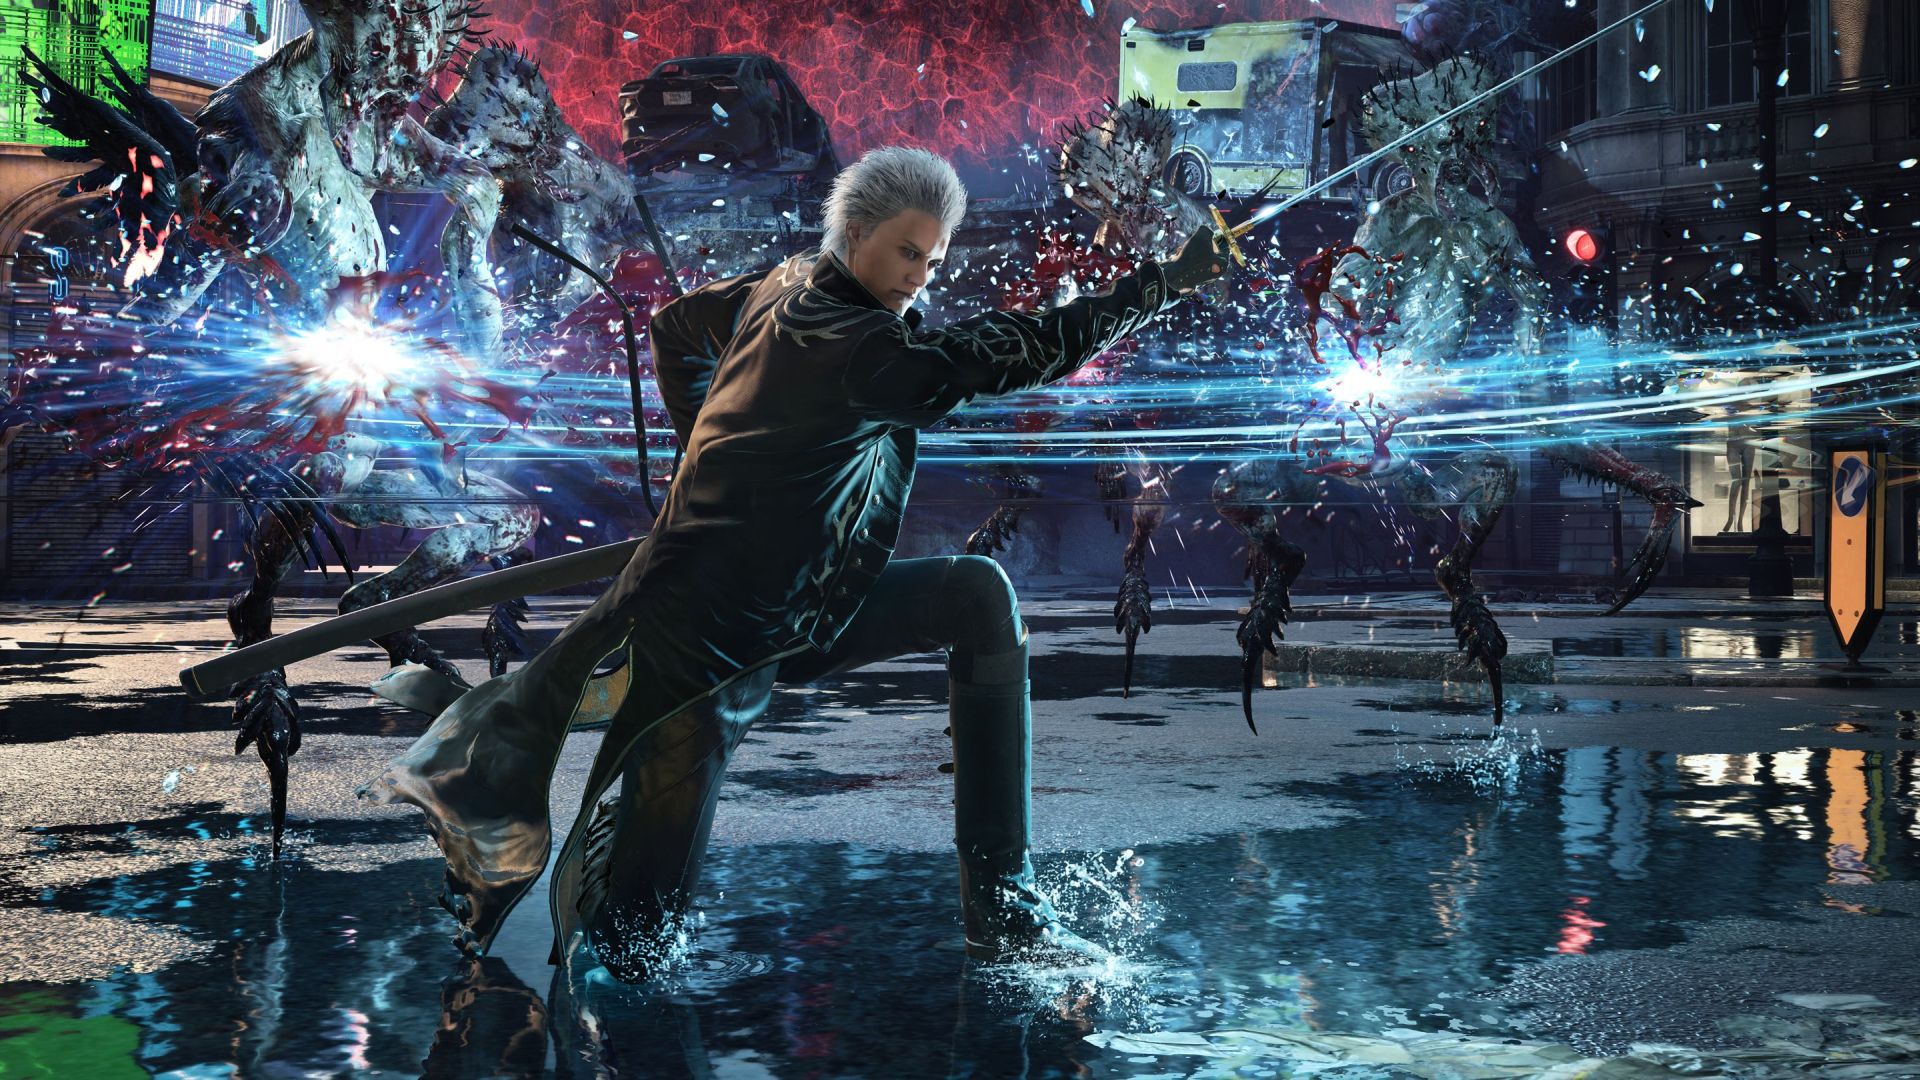 Devil May Cry 5 Special Edition Features 4K Resolution, Ray Tracing Effects At 60 FPS , And Running At 120 FPS